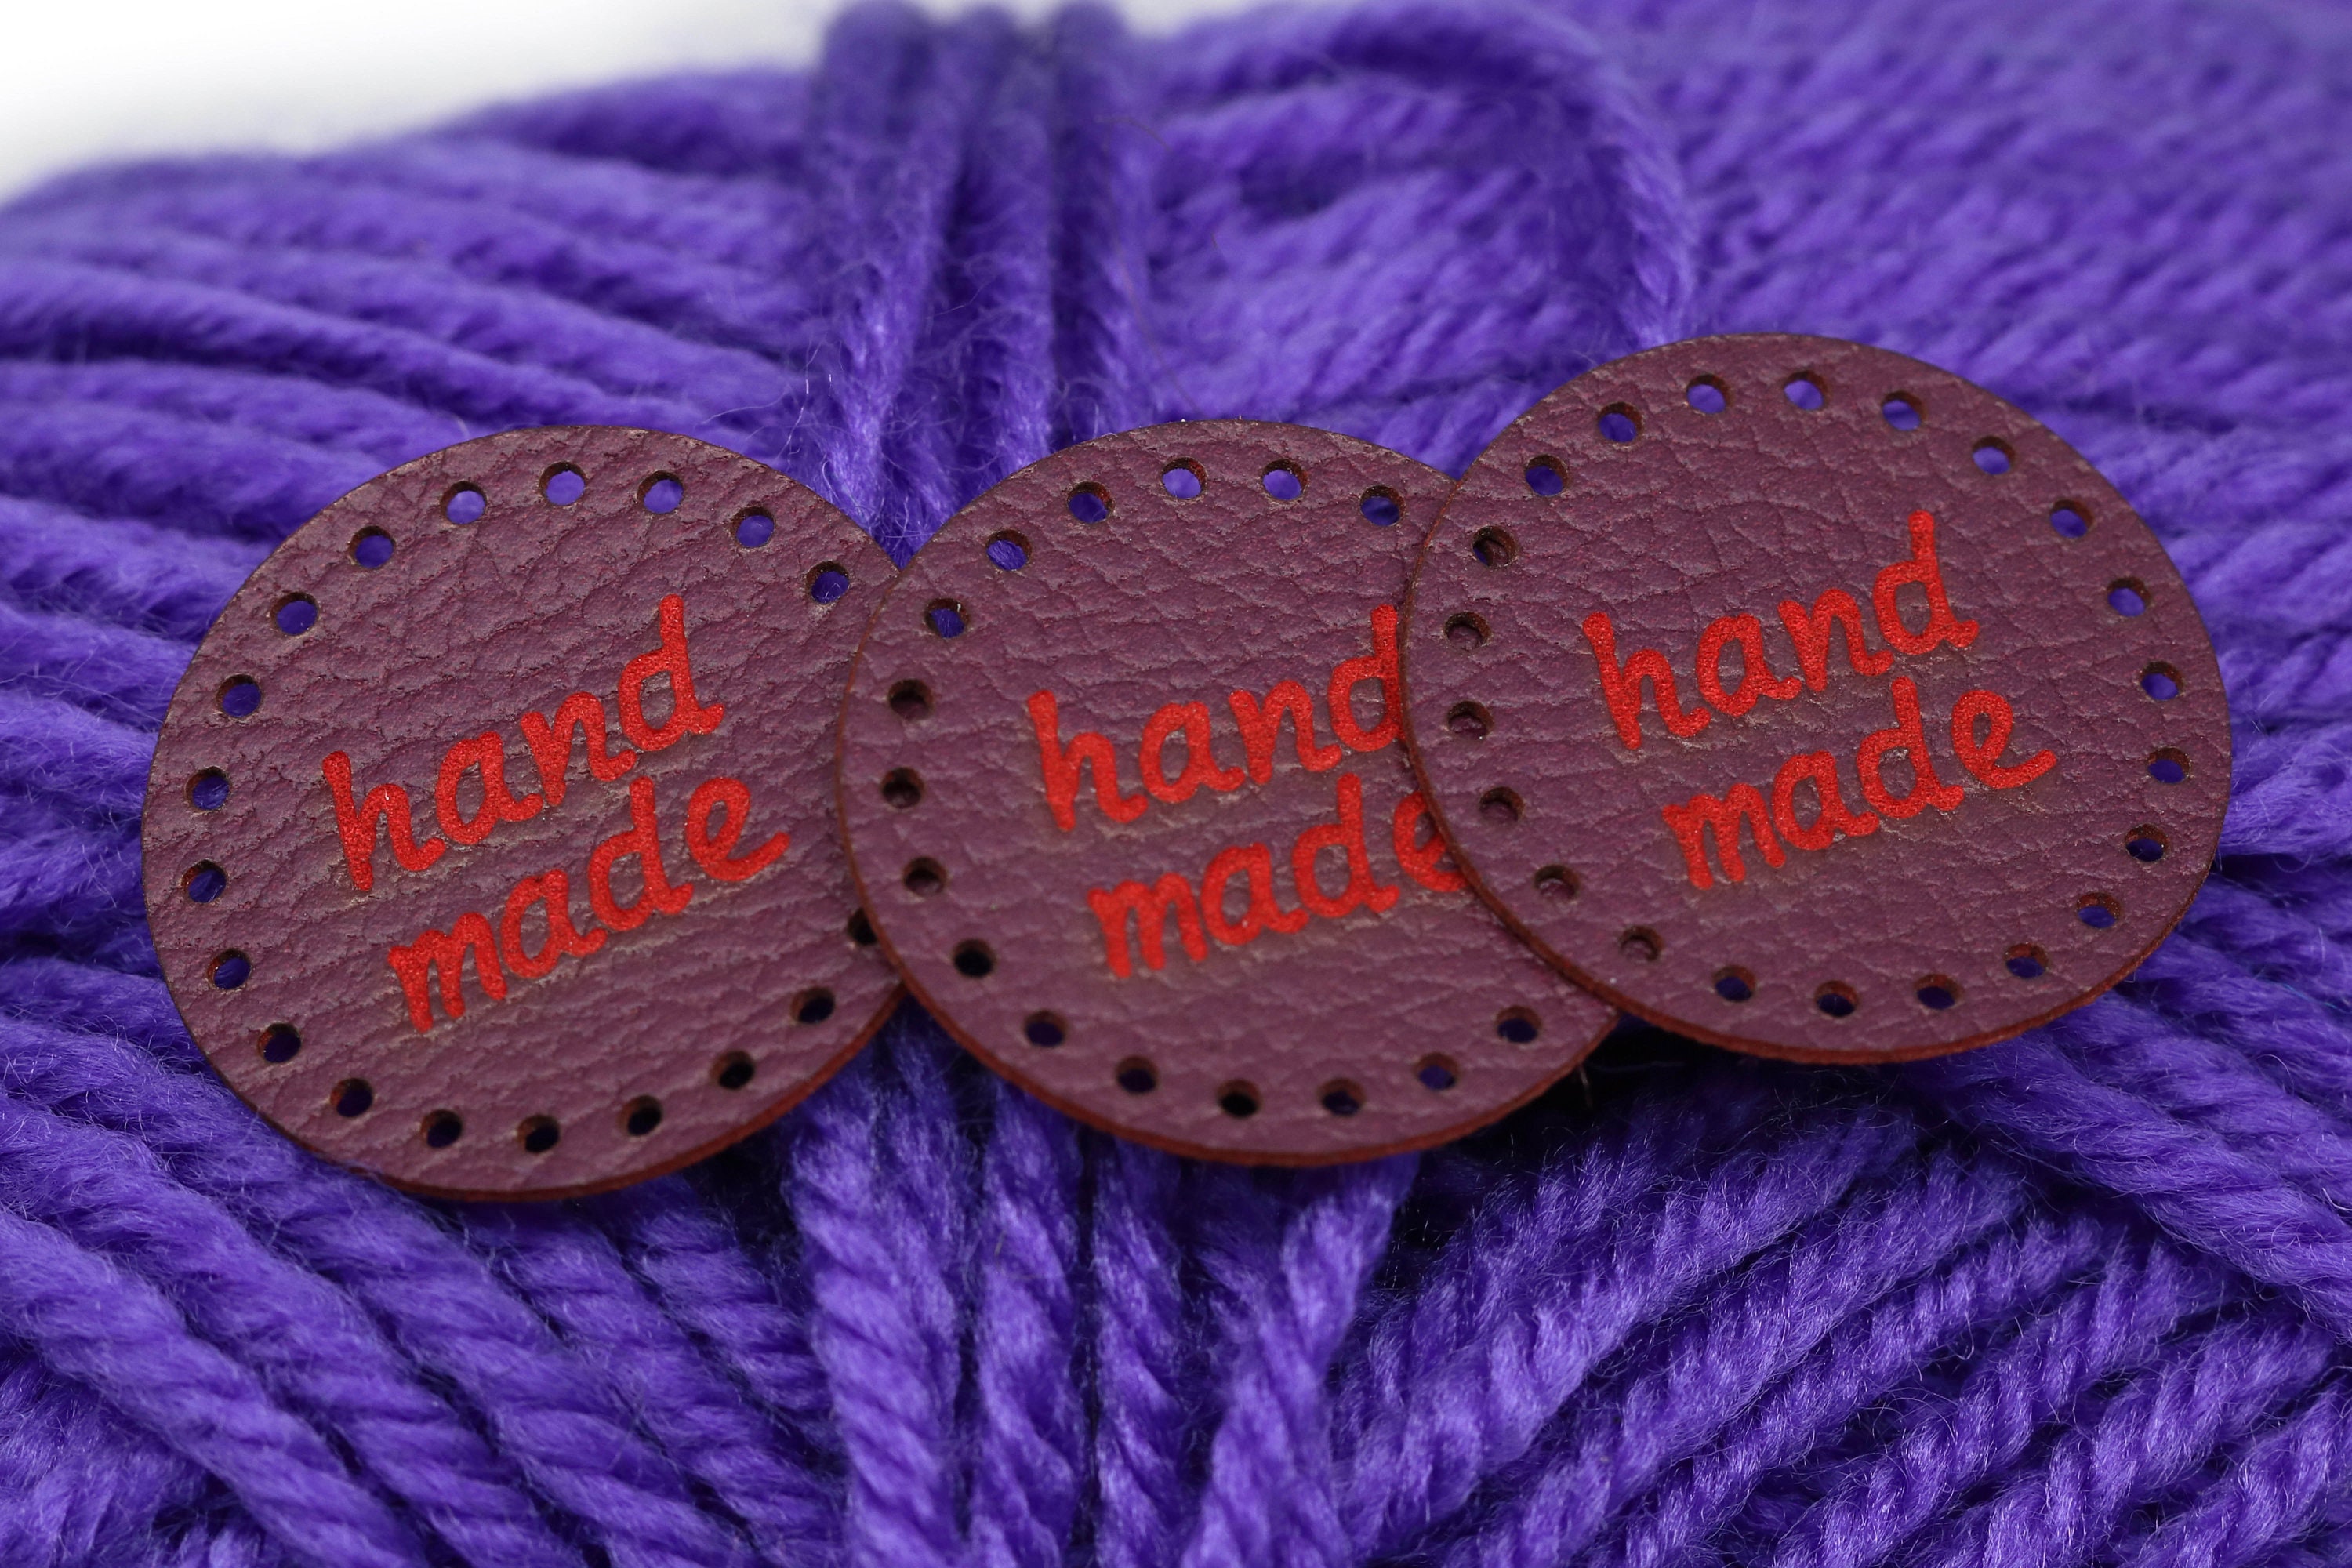 Folding Leather labels Handmade Tags - Red-Violet Mod. HMD, Yarn hand made  - PU Leather Labels for crochet items, sewing Faux Leather Tags